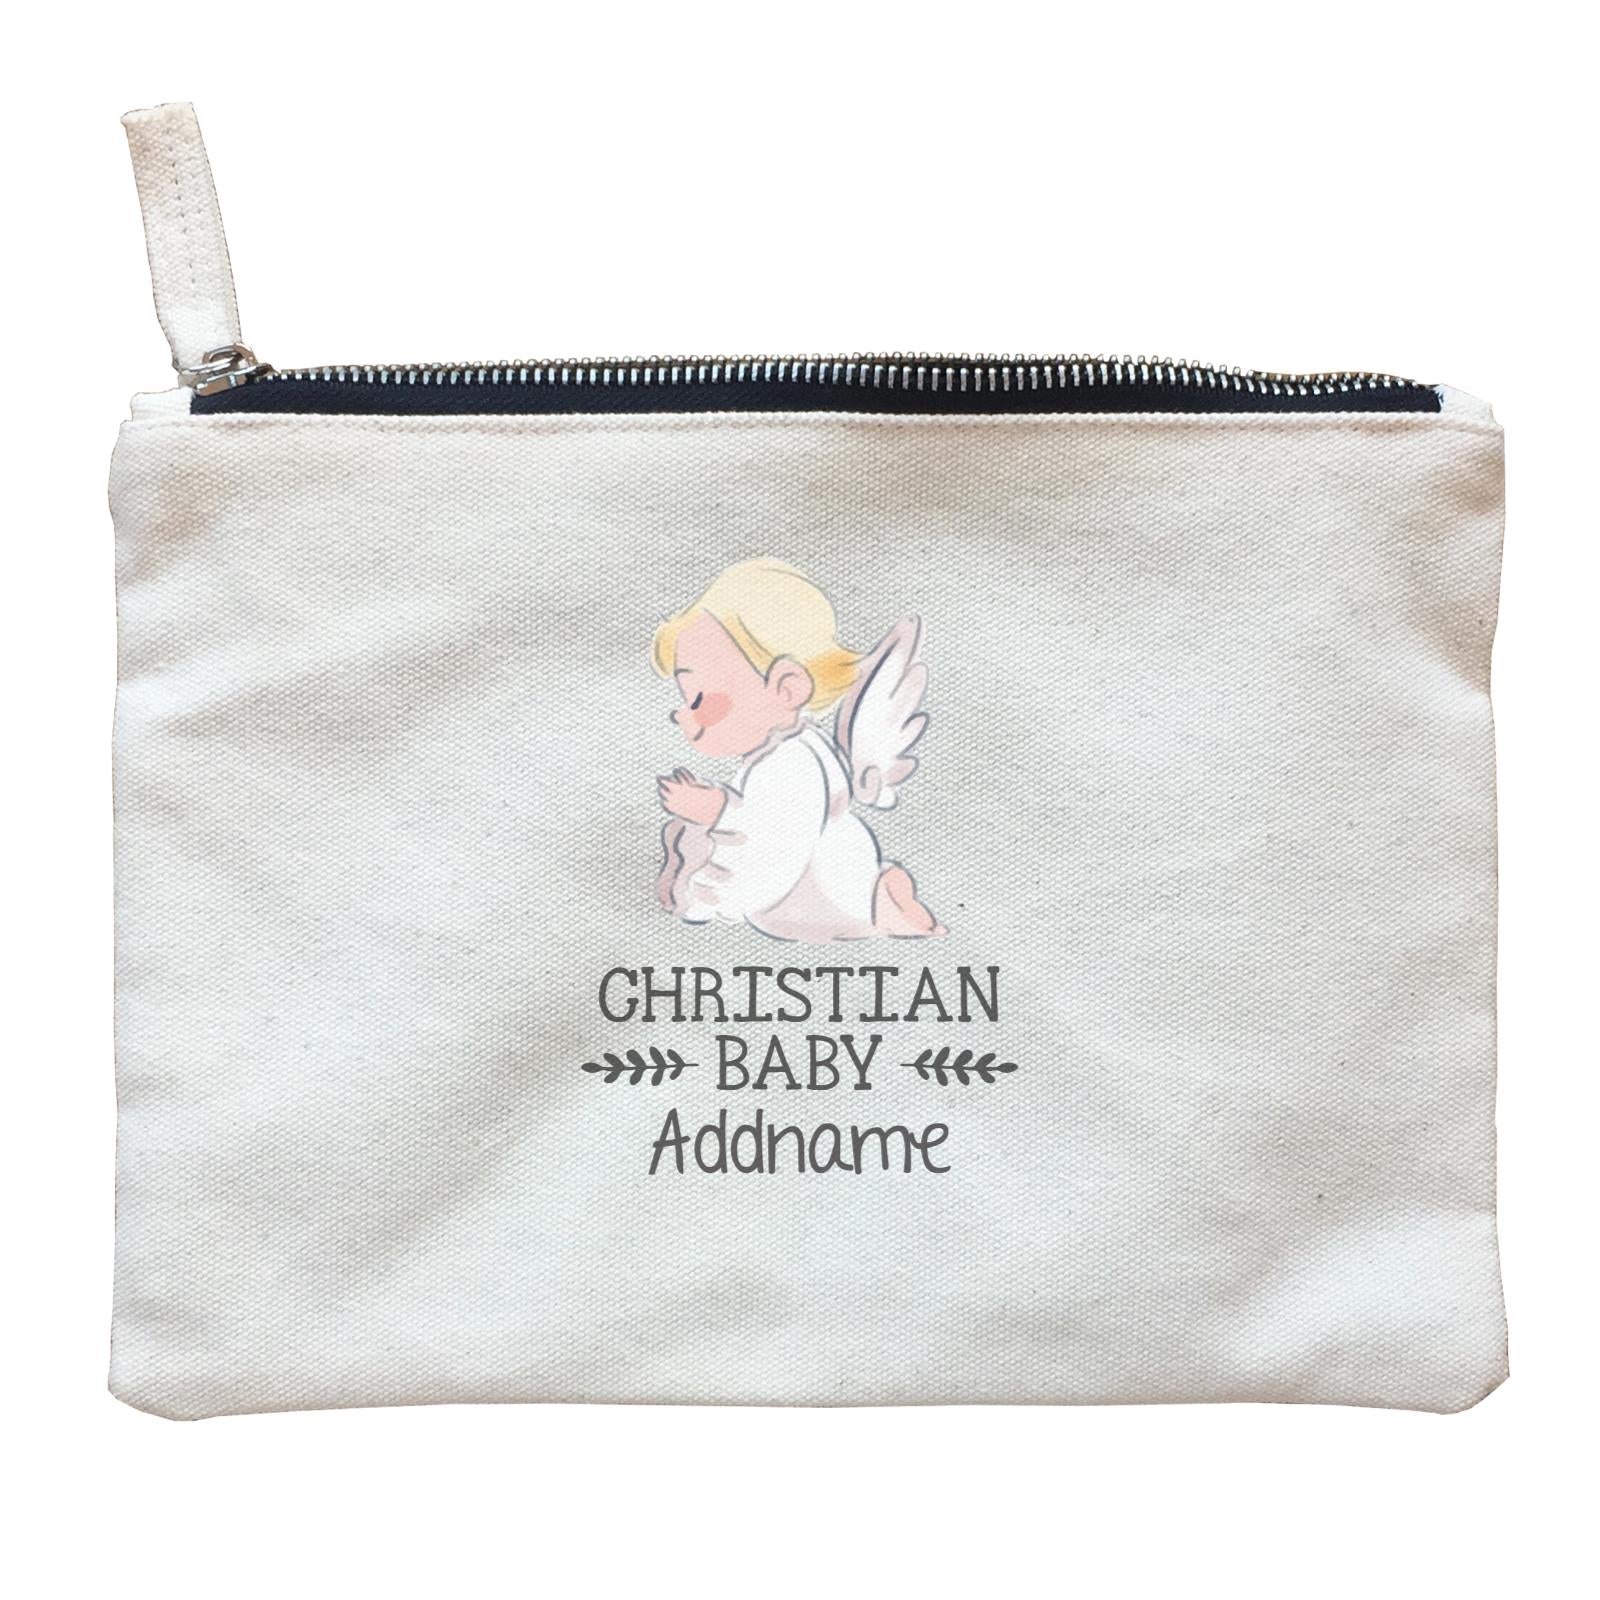 Christian Baby Angel Christian Baby Addname Zipper Pouch